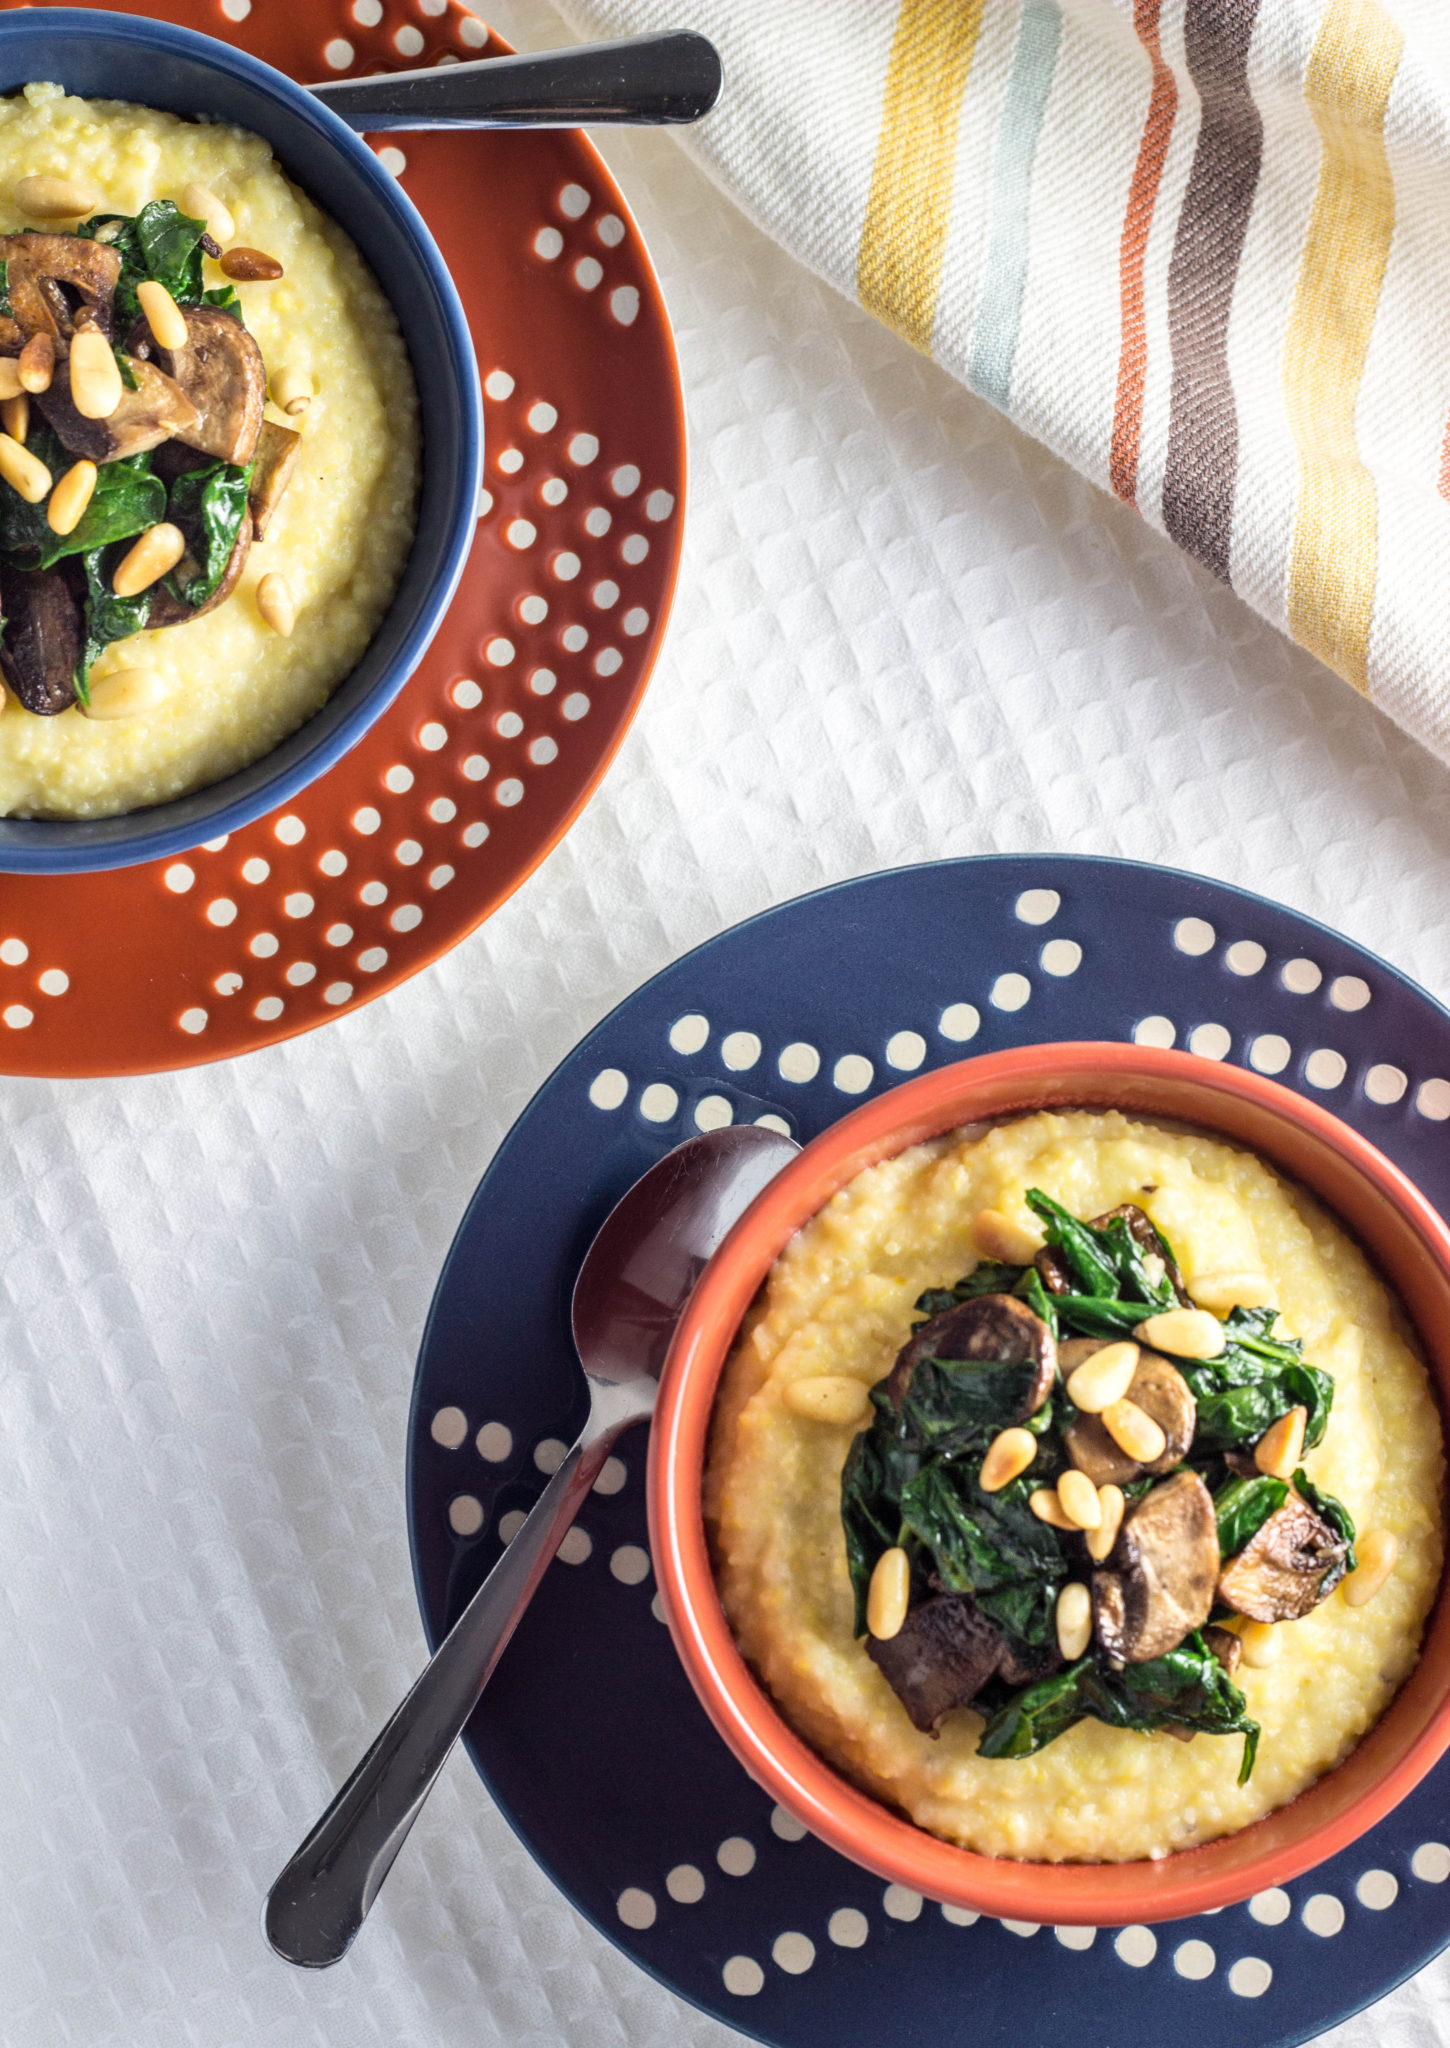 Creamy Polenta with Mushrooms, Spinach, and Toasted Pine Nuts-A simple, no fuss creamy polenta topped with sautéed baby portabella mushrooms, lightly wilted garlicky spinach, and freshly toasted pine nuts. This warm and comforting dish comes together in about 30 minutes and makes a delicious, quick meal on chilly nights.